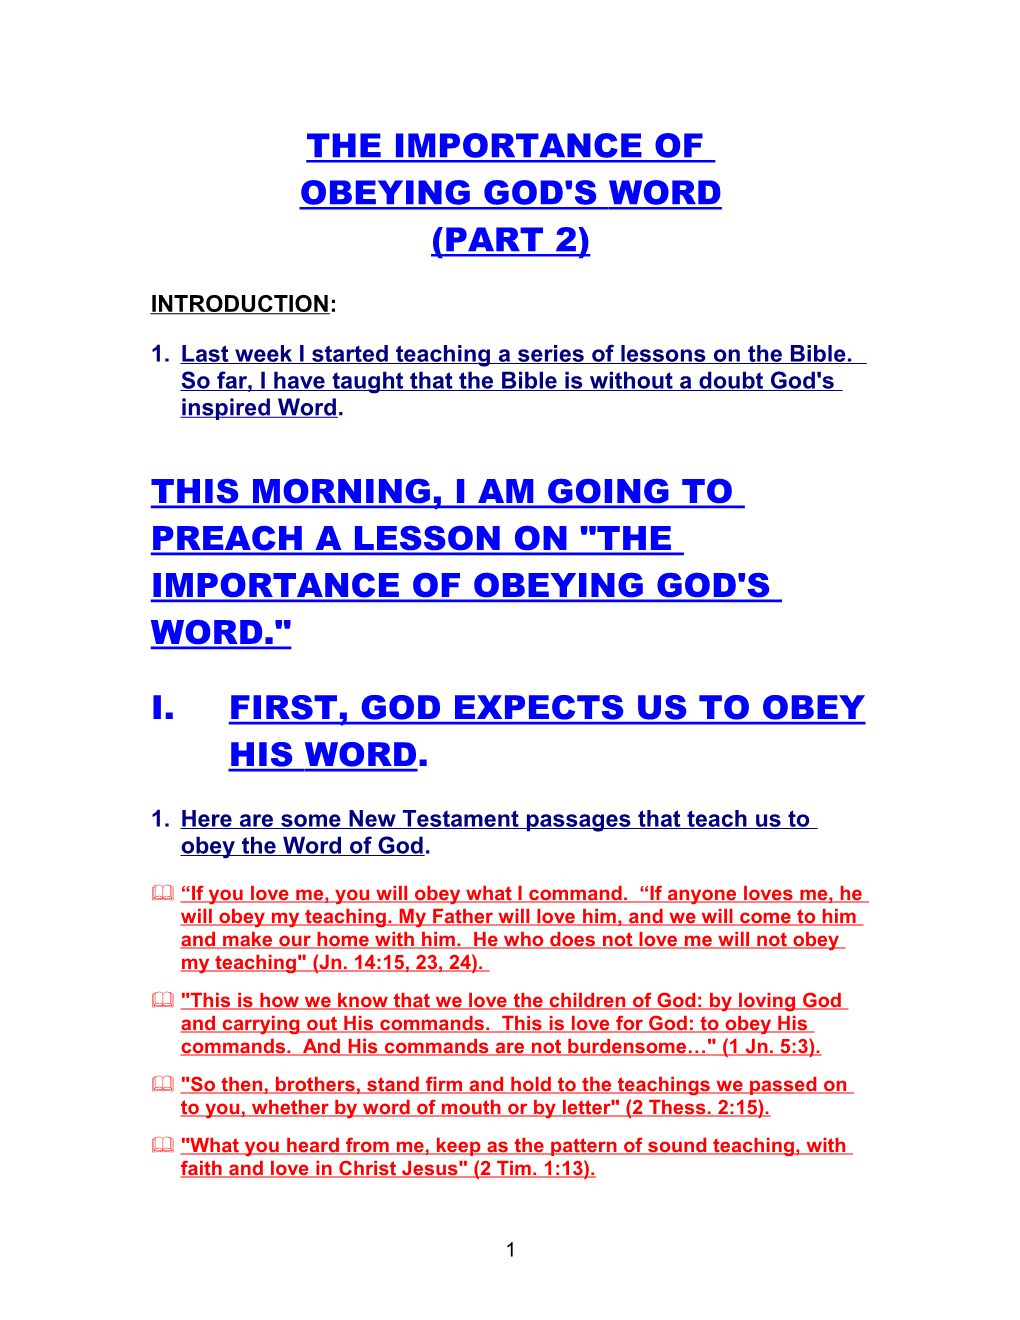 The Importance of Obeying God's Word (Part 2)